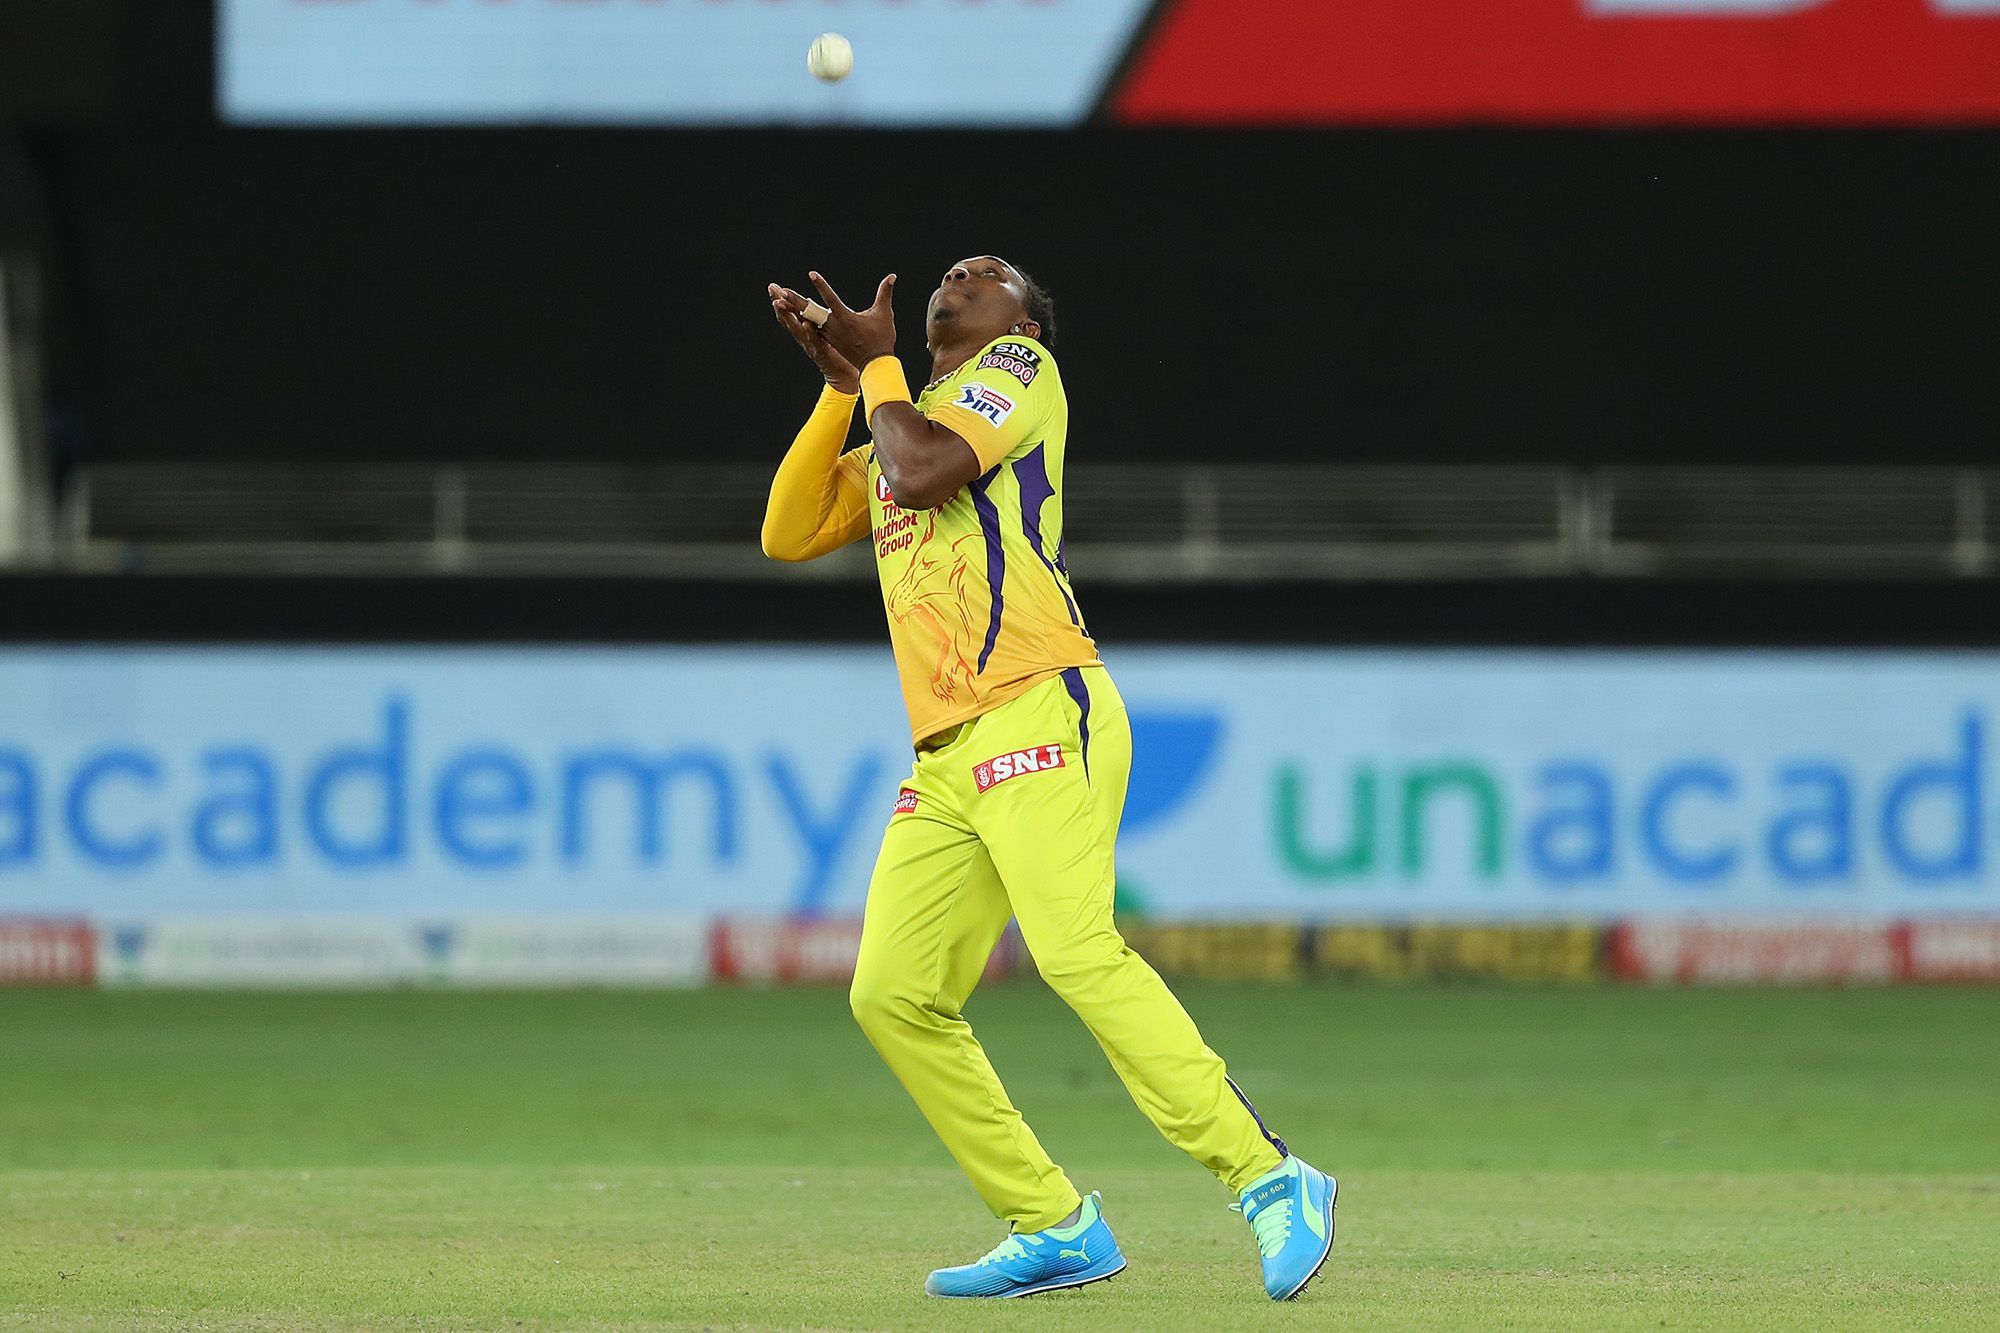 IPL 2020 | Dwayne Bravo won't take part in remainder of IPL, will fly back soon, reveals CSK CEO